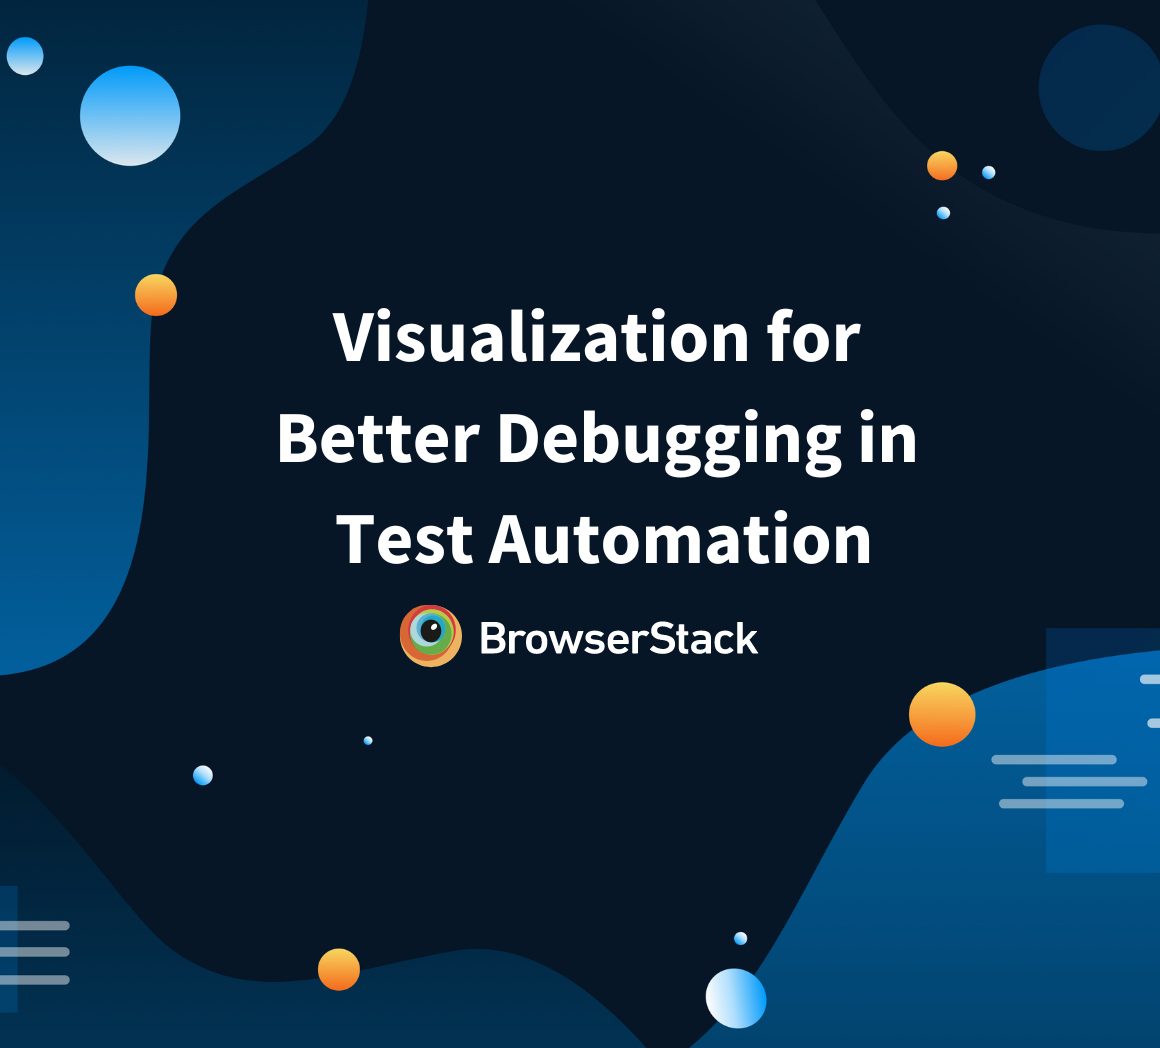 Visualization for better debugging in Test Automation